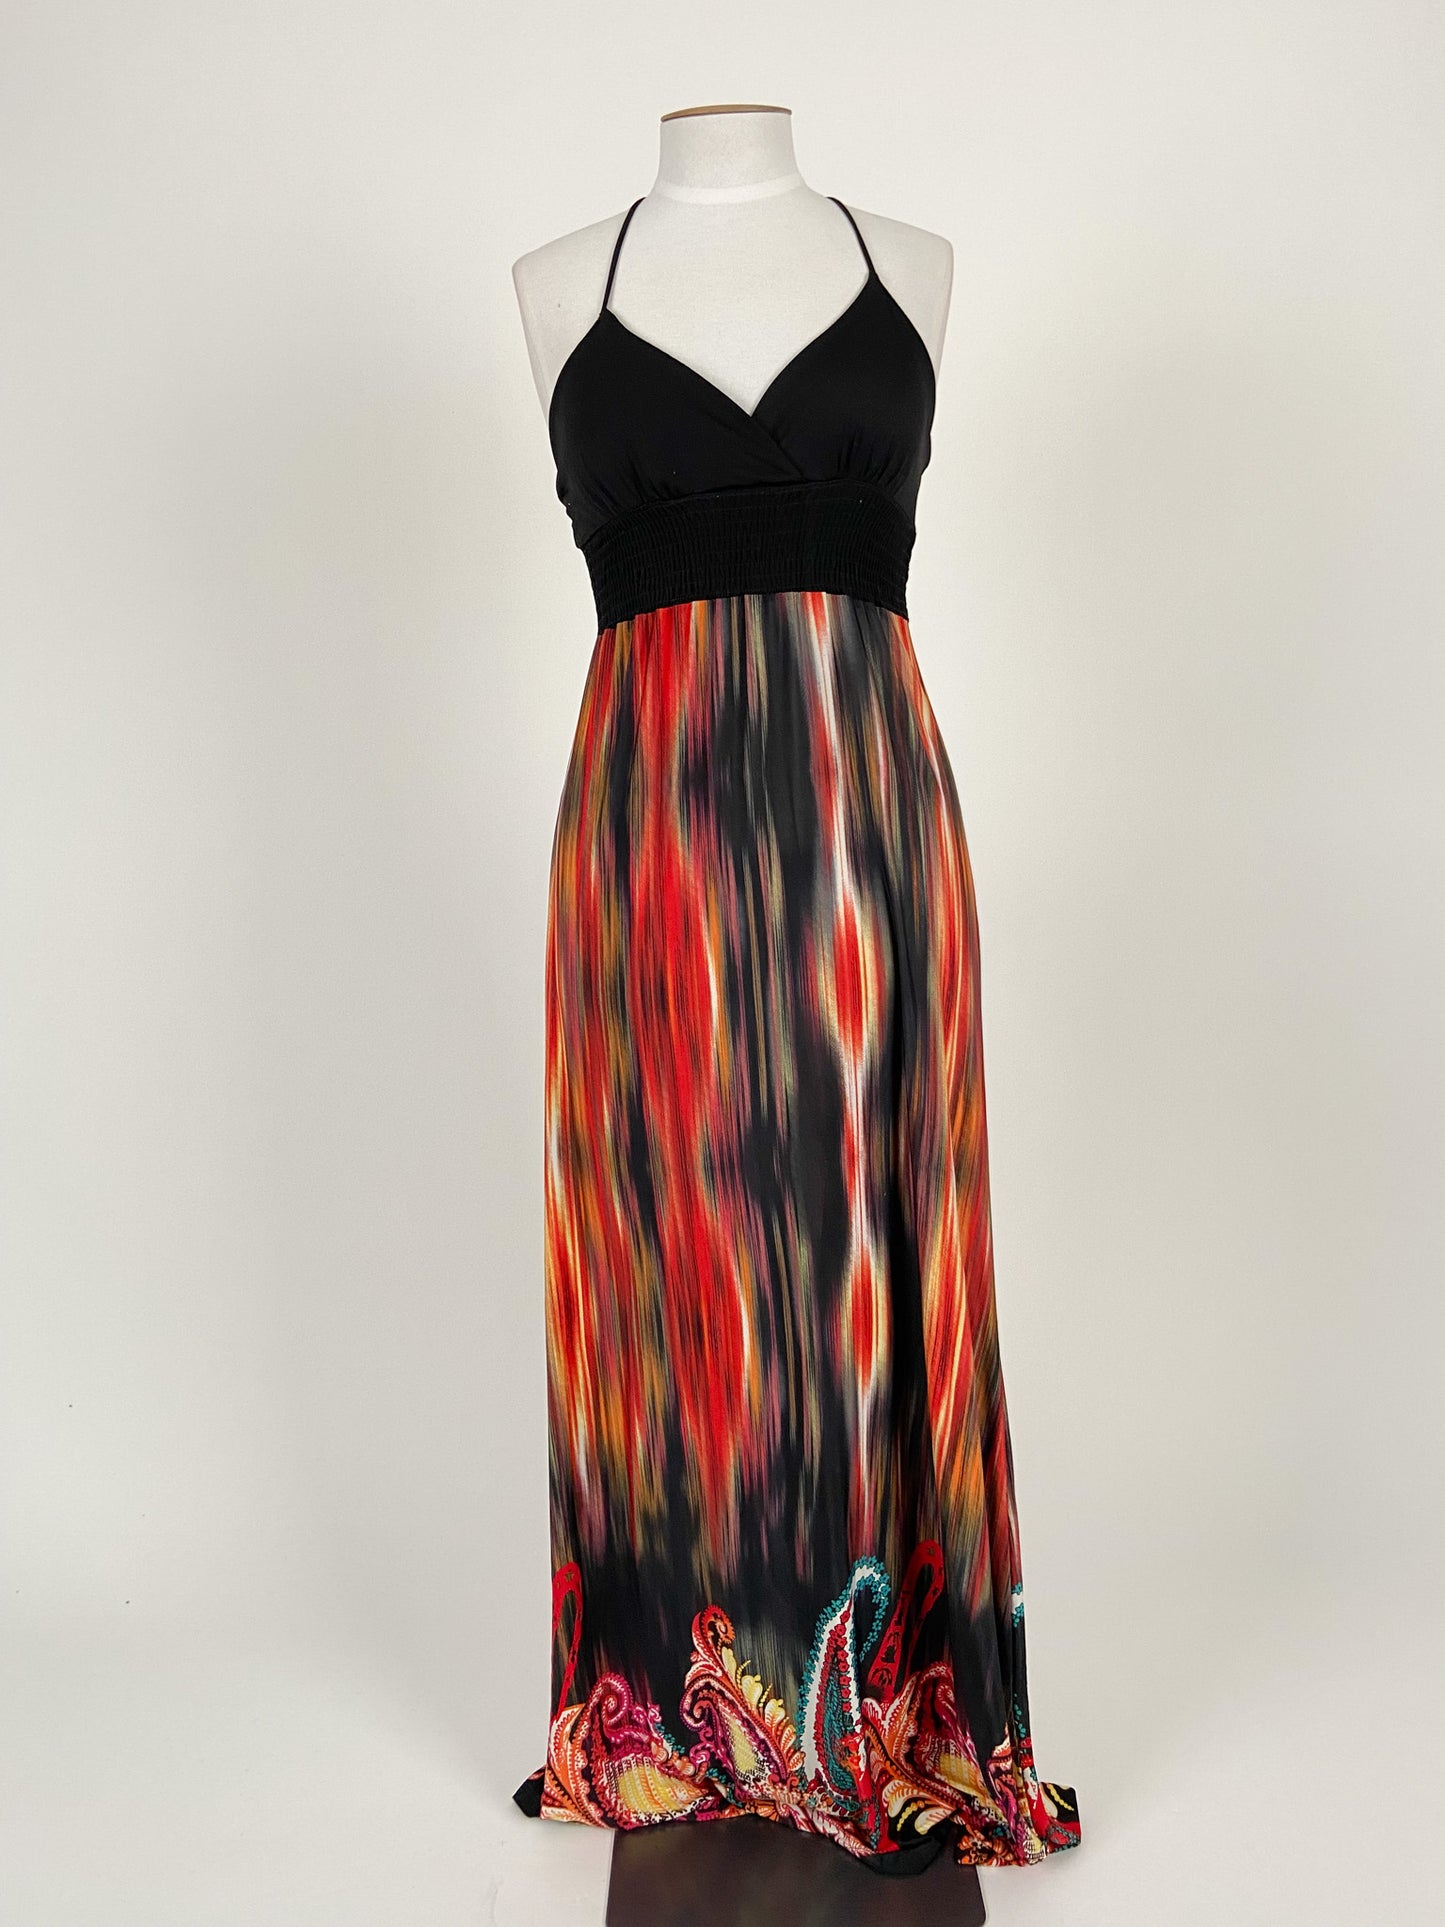 Suzy Shire | Multicoloured Cocktail/Formal Dress | Size M